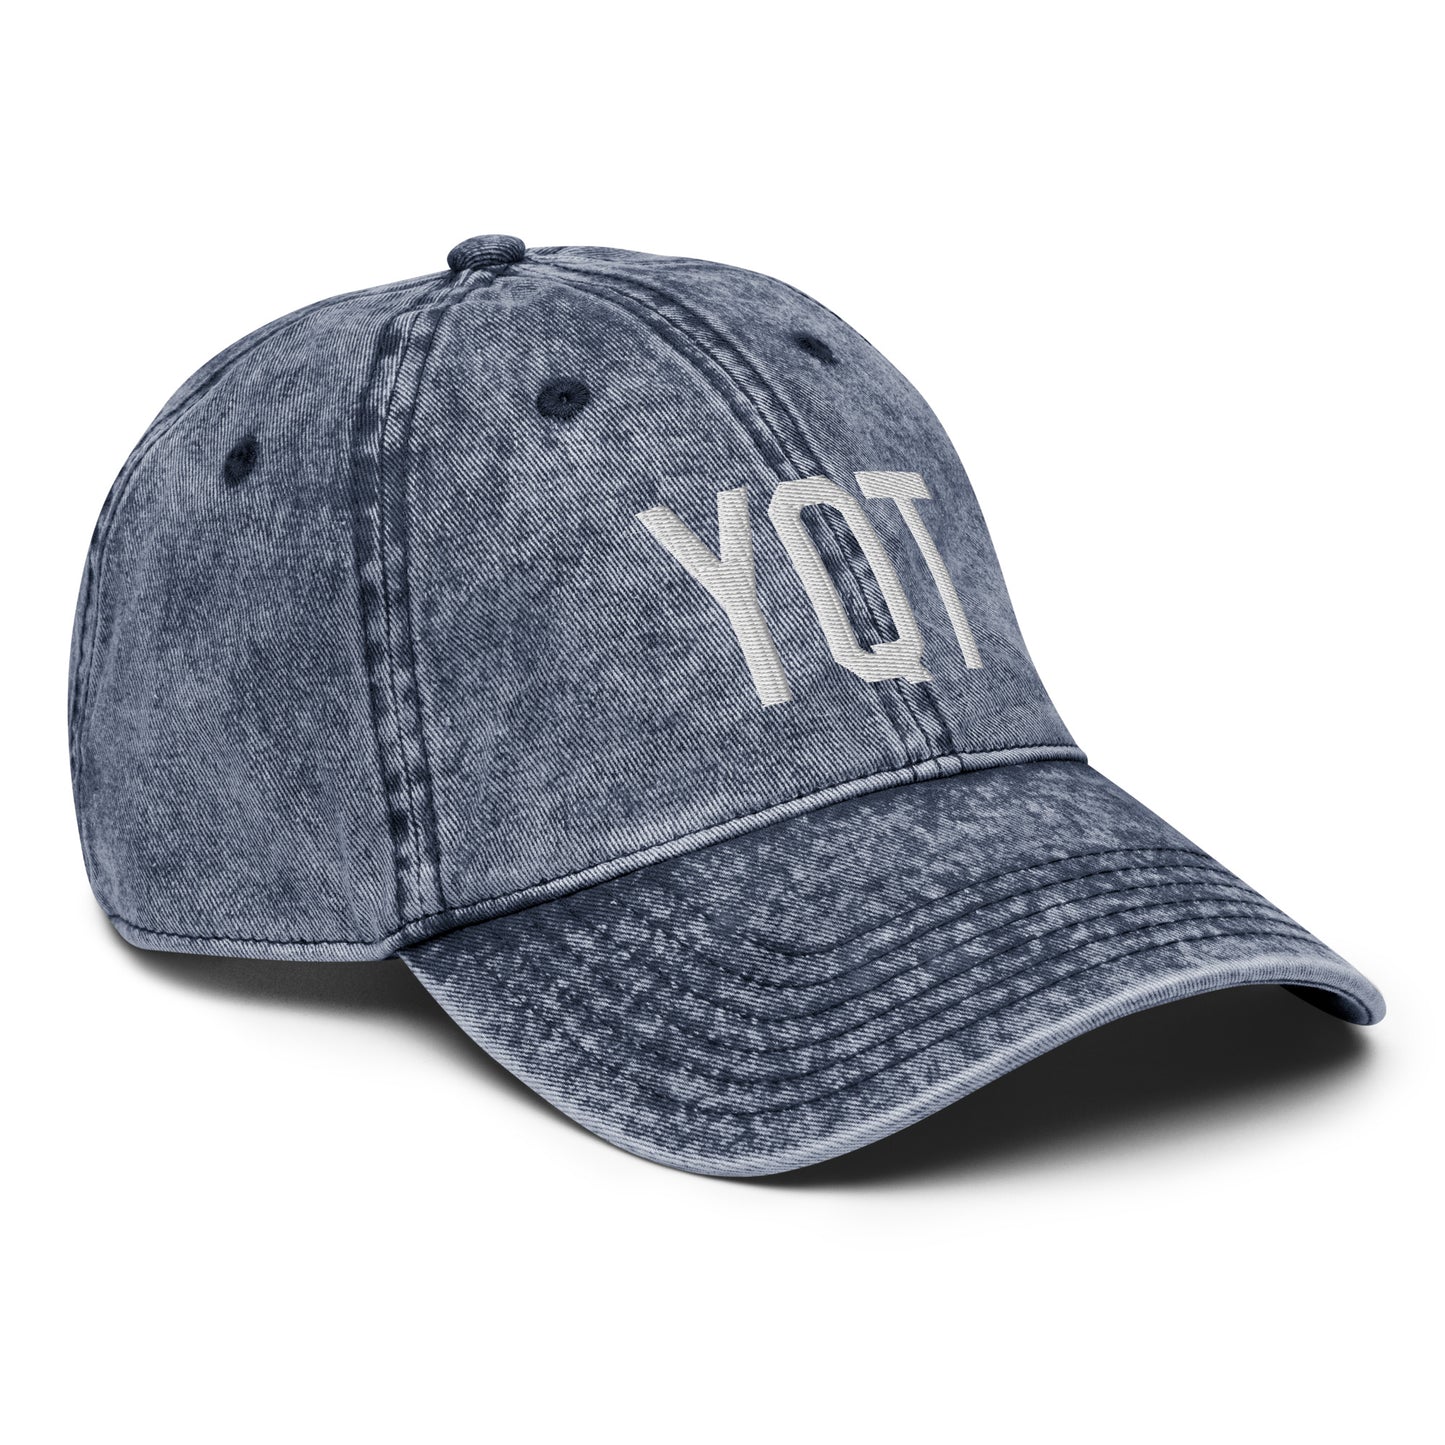 Airport Code Twill Cap - White • YQT Thunder Bay • YHM Designs - Image 18